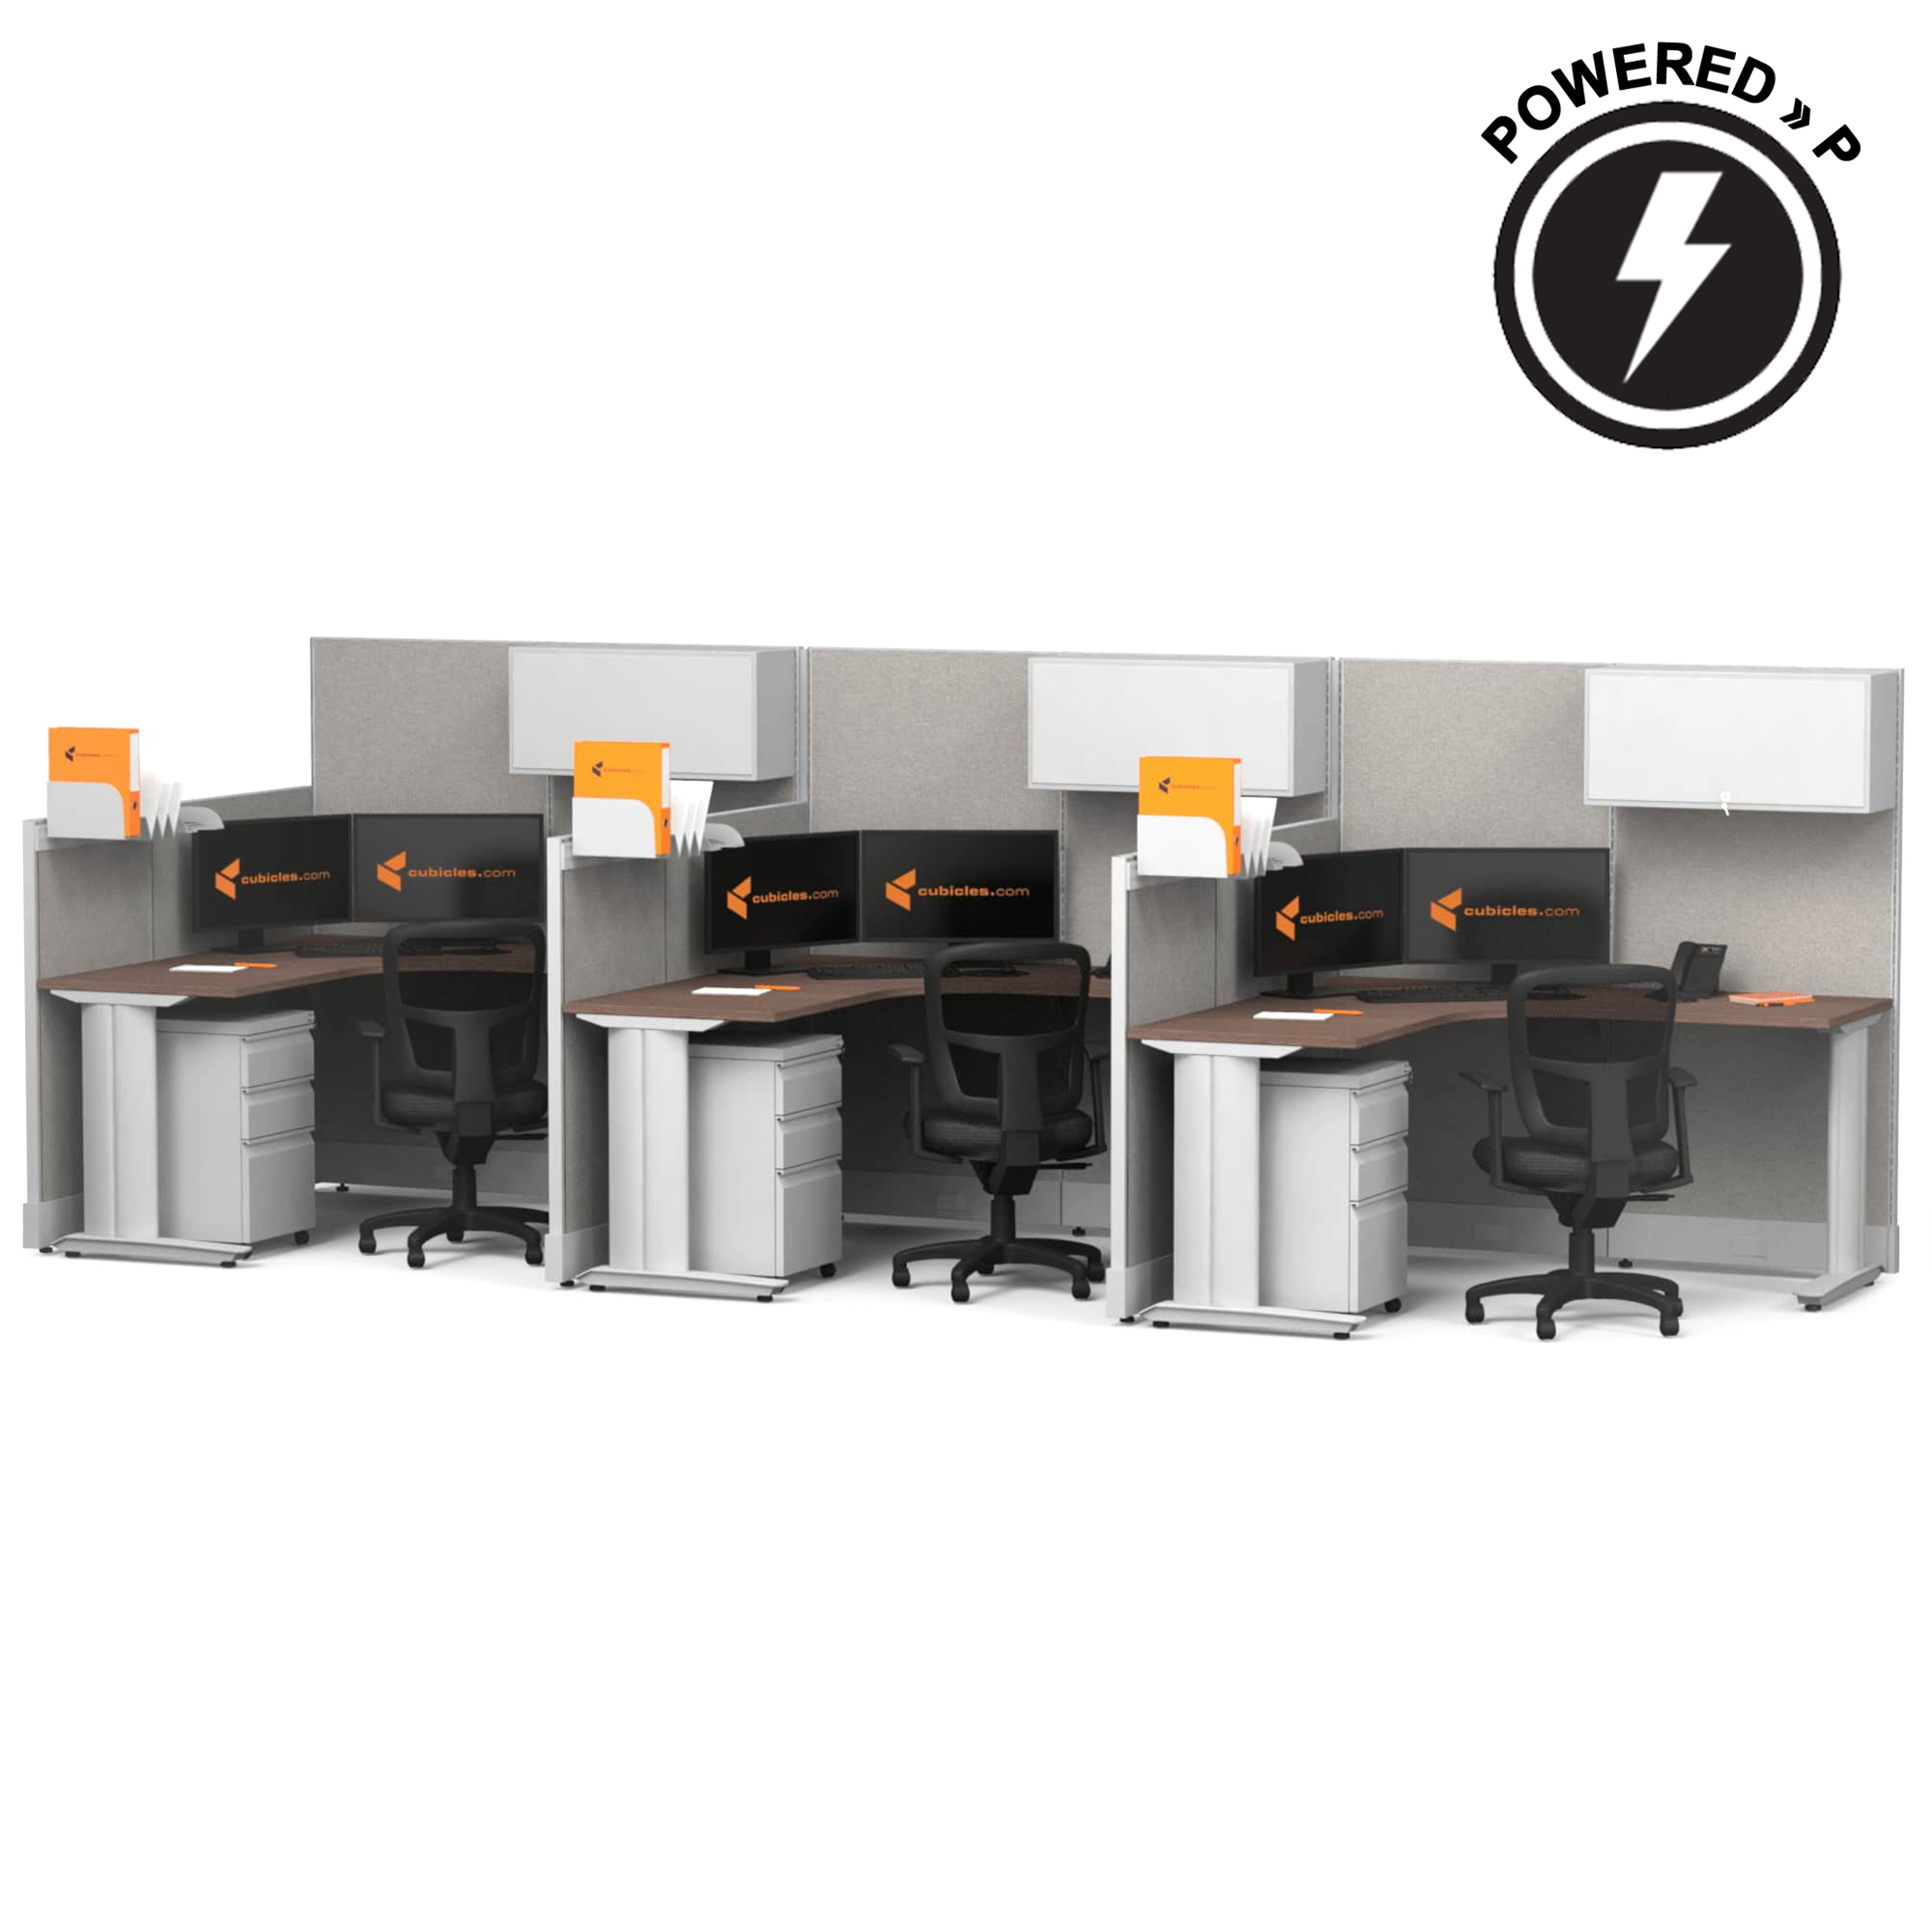 cubicle-desk-l-shaped-workstation-3pack-inline-powered-with-storage-sign.jpg